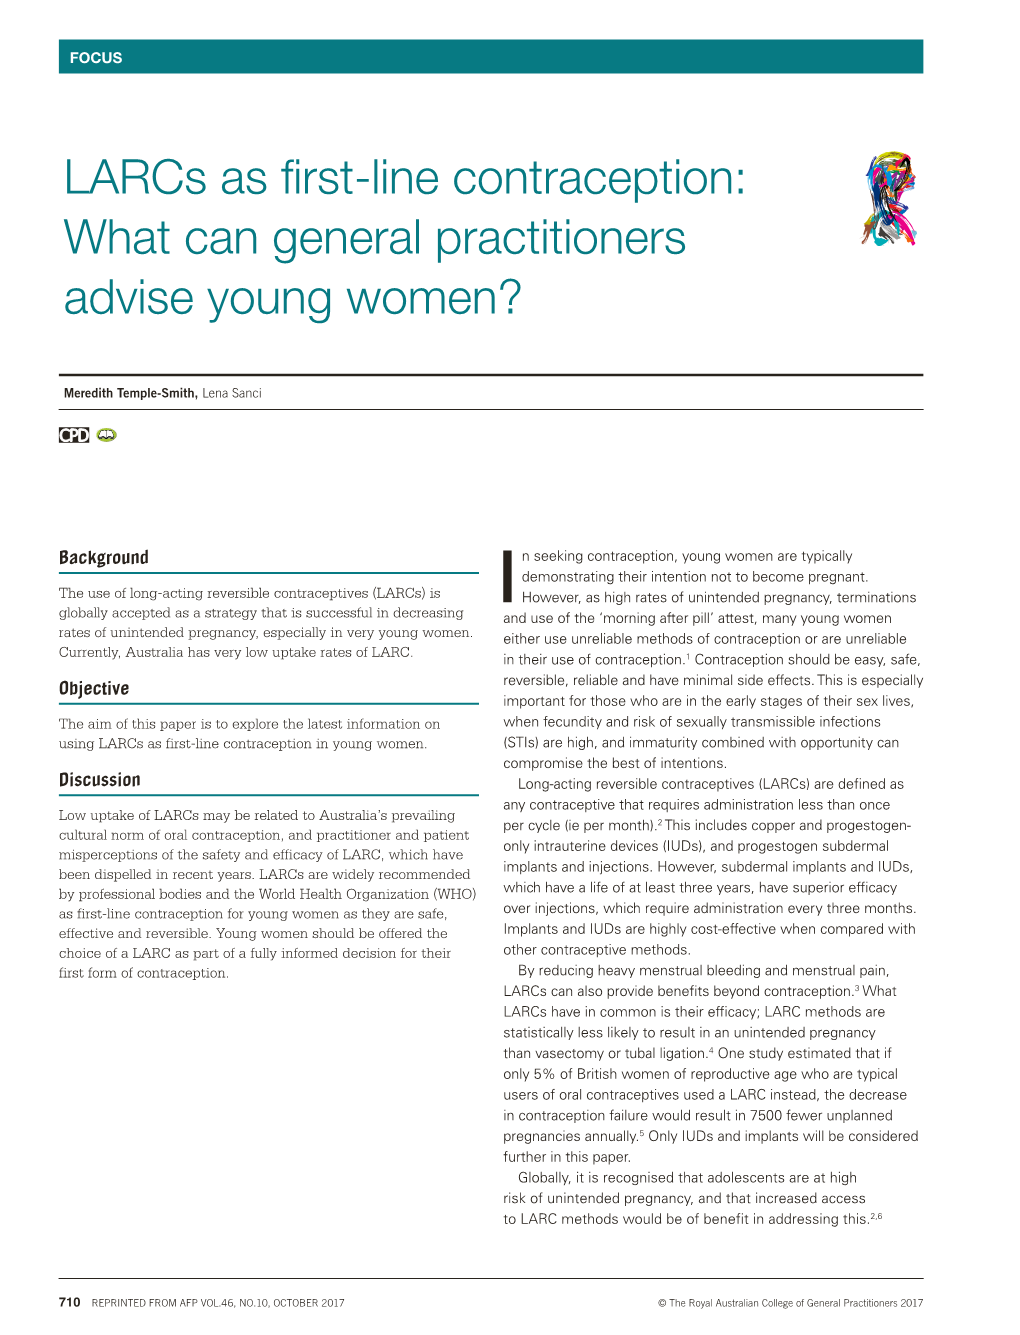 Larcs As First-Line Contraception: What Can General Practitioners Advise Young Women?